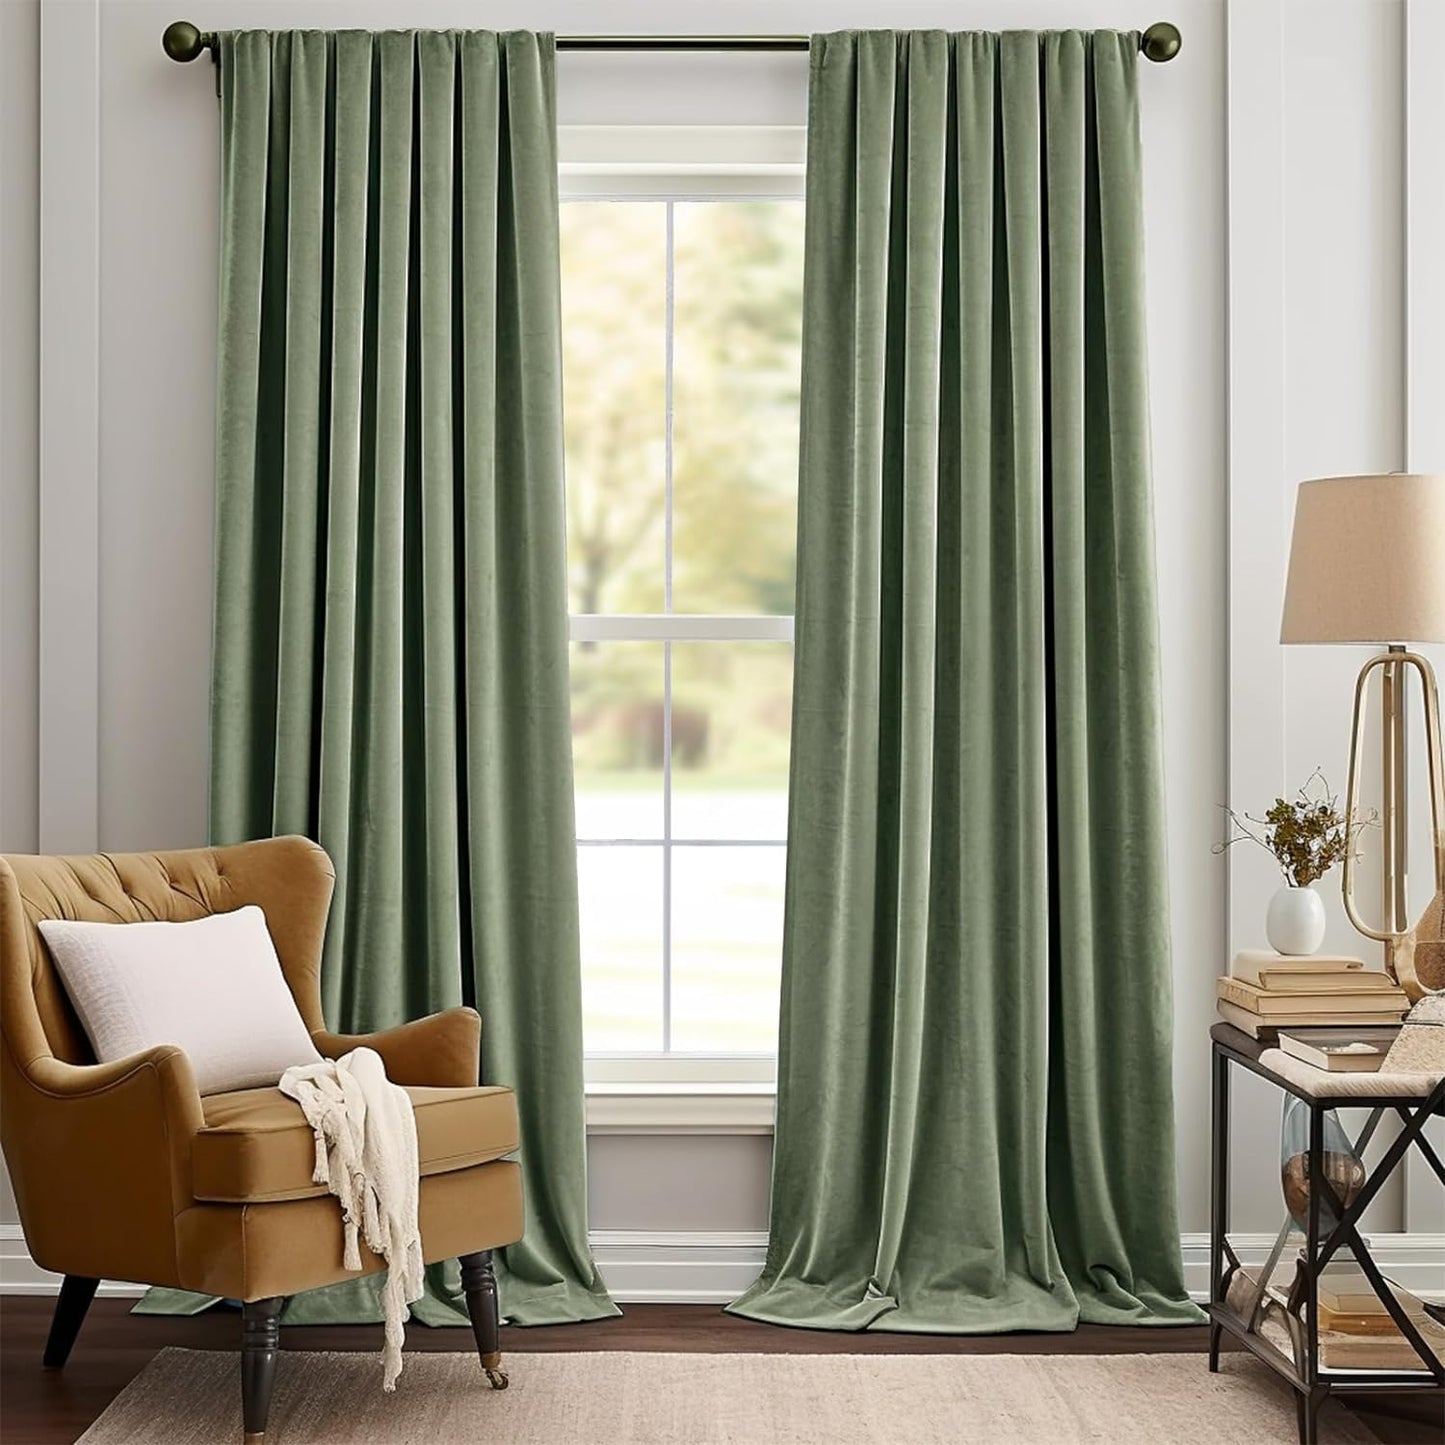 Jinchan Velvet Blackout Curtain for Living Room, Thermal Insulated Luxury Drape for Bedroom 96 Inch Long, Stylish Soft Privacy Room Darkening Window Treatment Rod Pocket 1 Panel, Emerald Green  CKNY HOME FASHION Grommet | Sage Green W52 X L84 